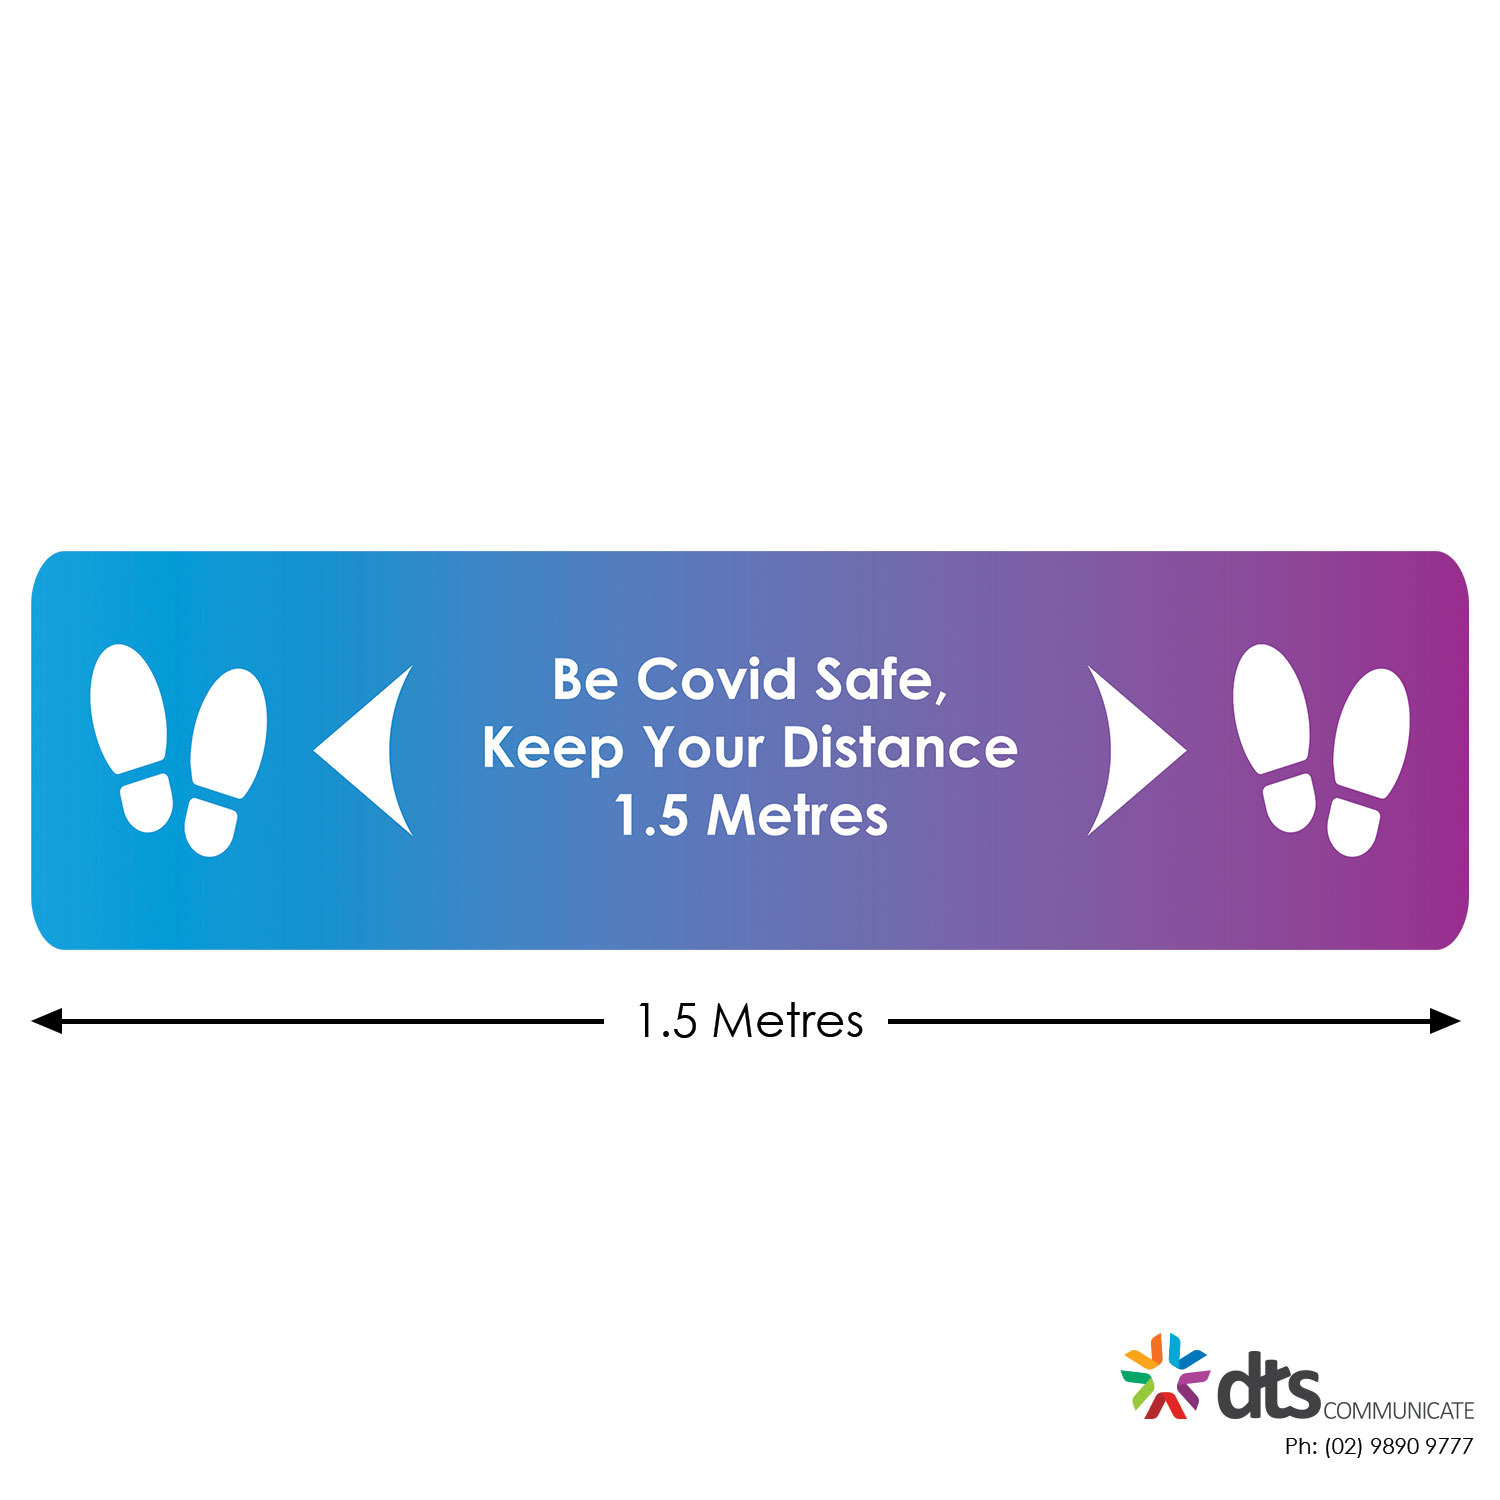 XLART DTS Covid19 Covid Floor Stickers Decals Social Distancing Sydney Melbourne Australia Be Safe Keep Your Distance Style 36